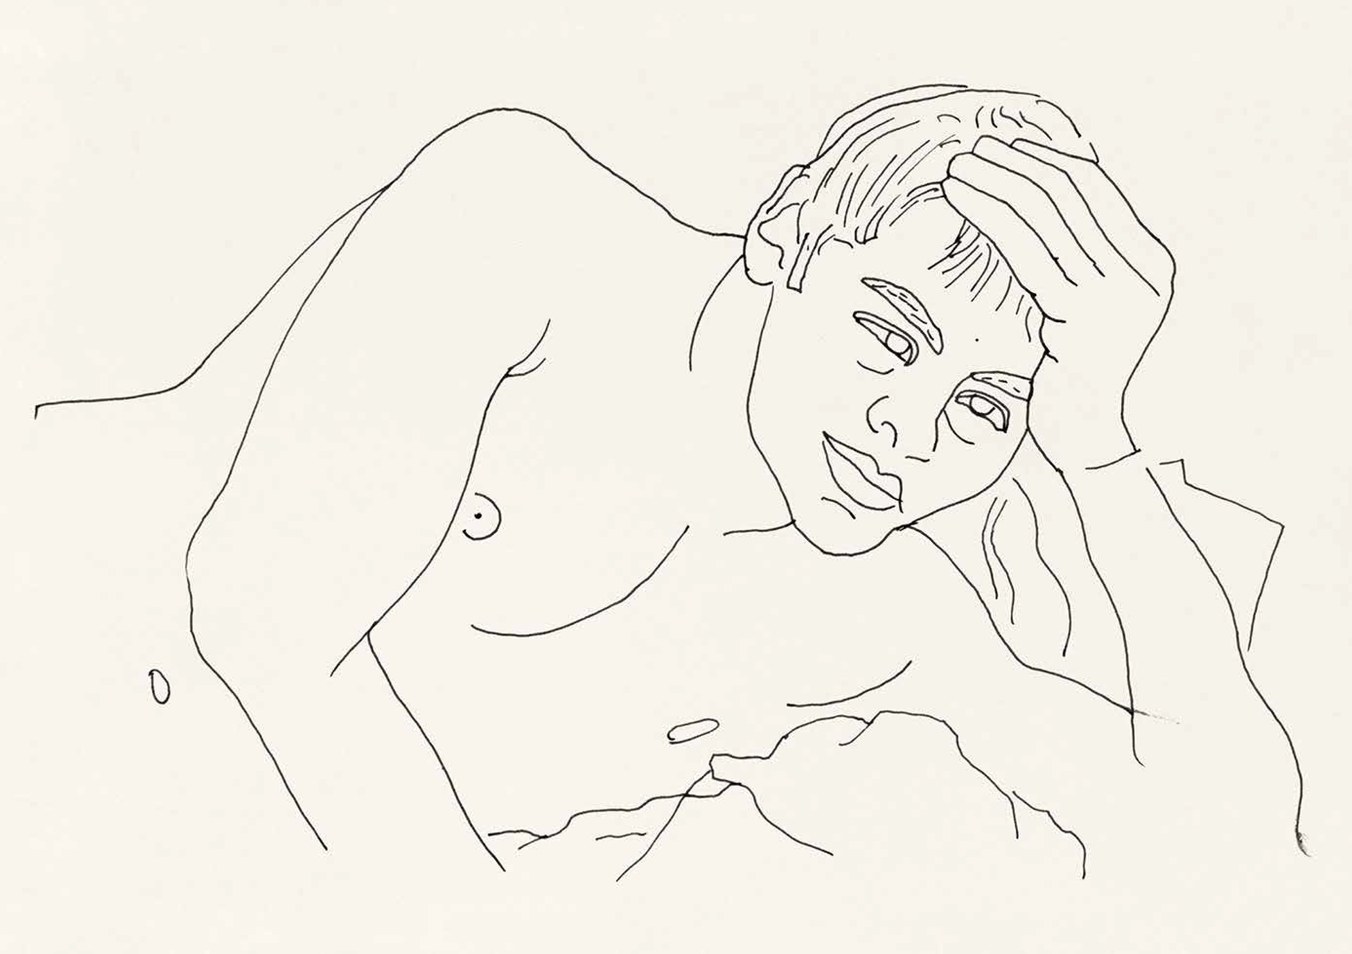 1991, ink on paper. Walter Pfeiffer. Courtesy of Edition Patrick Frey.